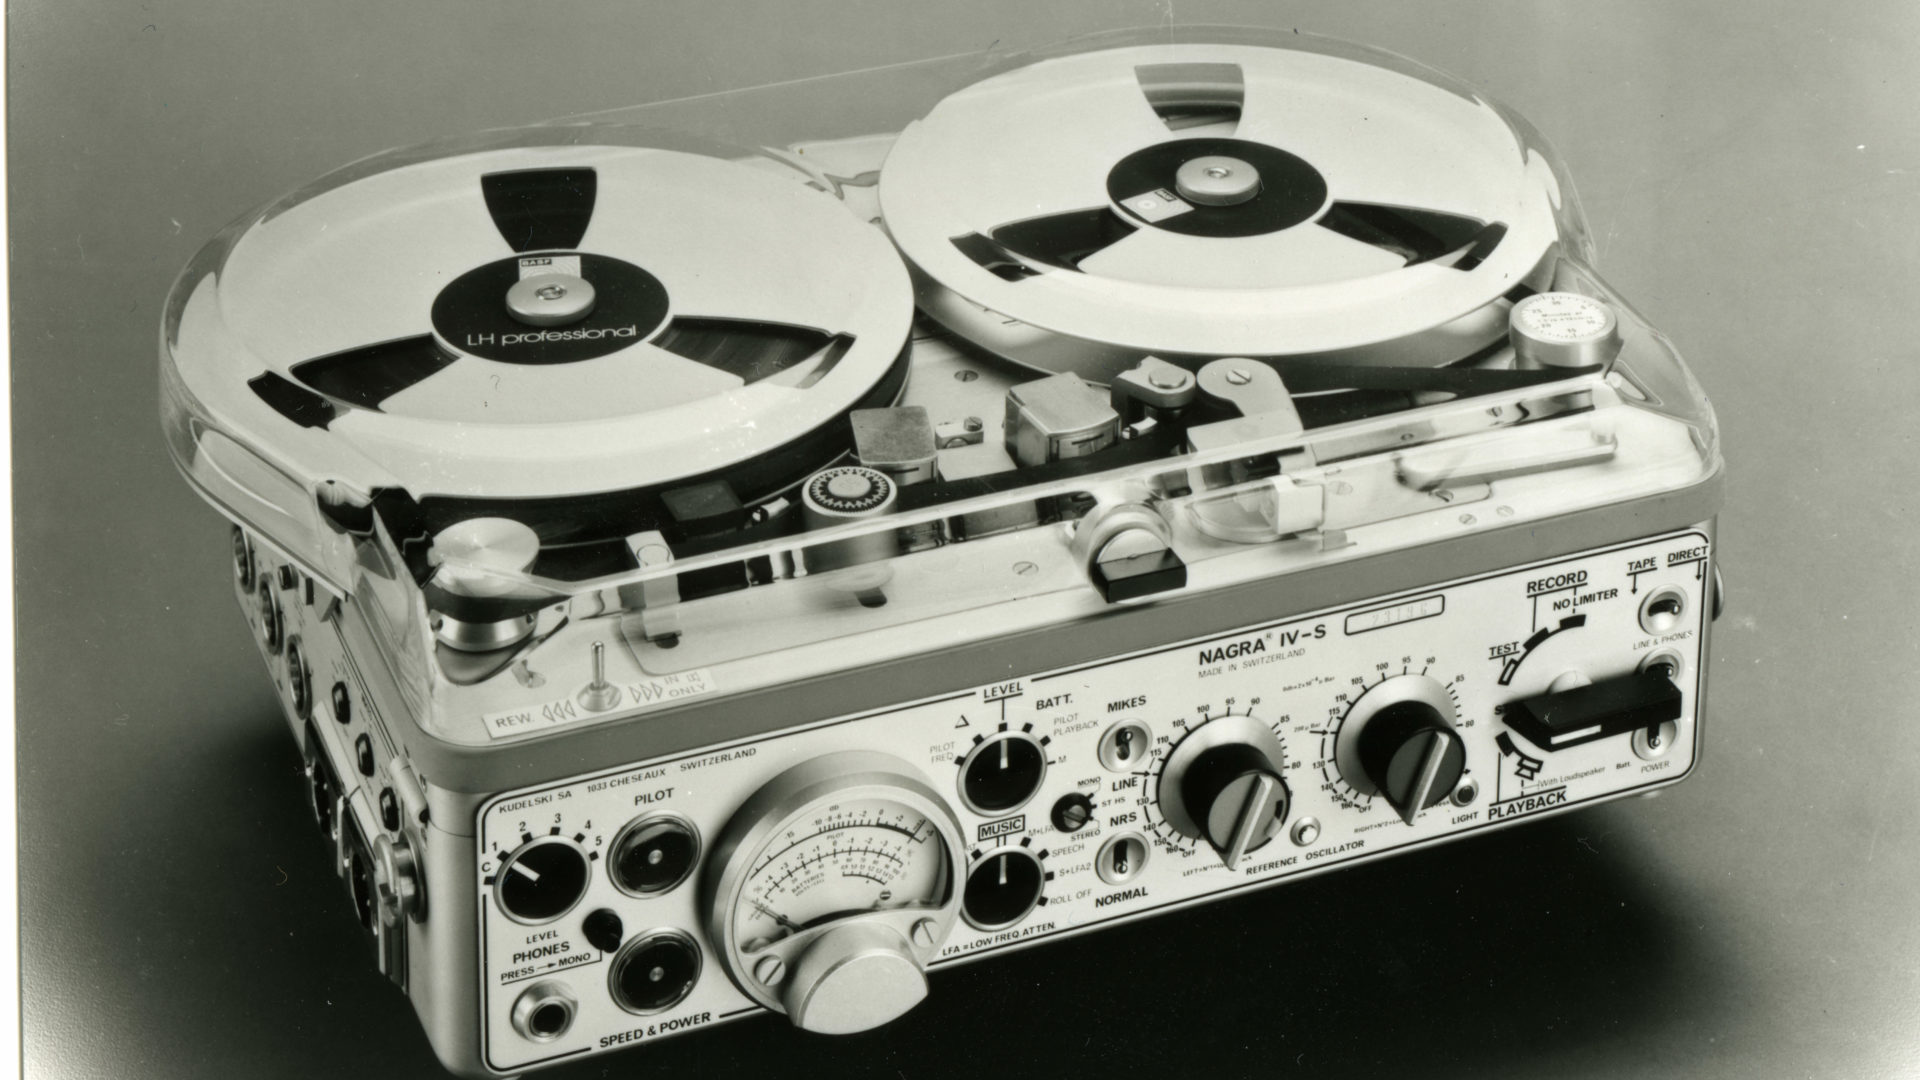 What is the best reel-to-reel tape recorder? - Quora